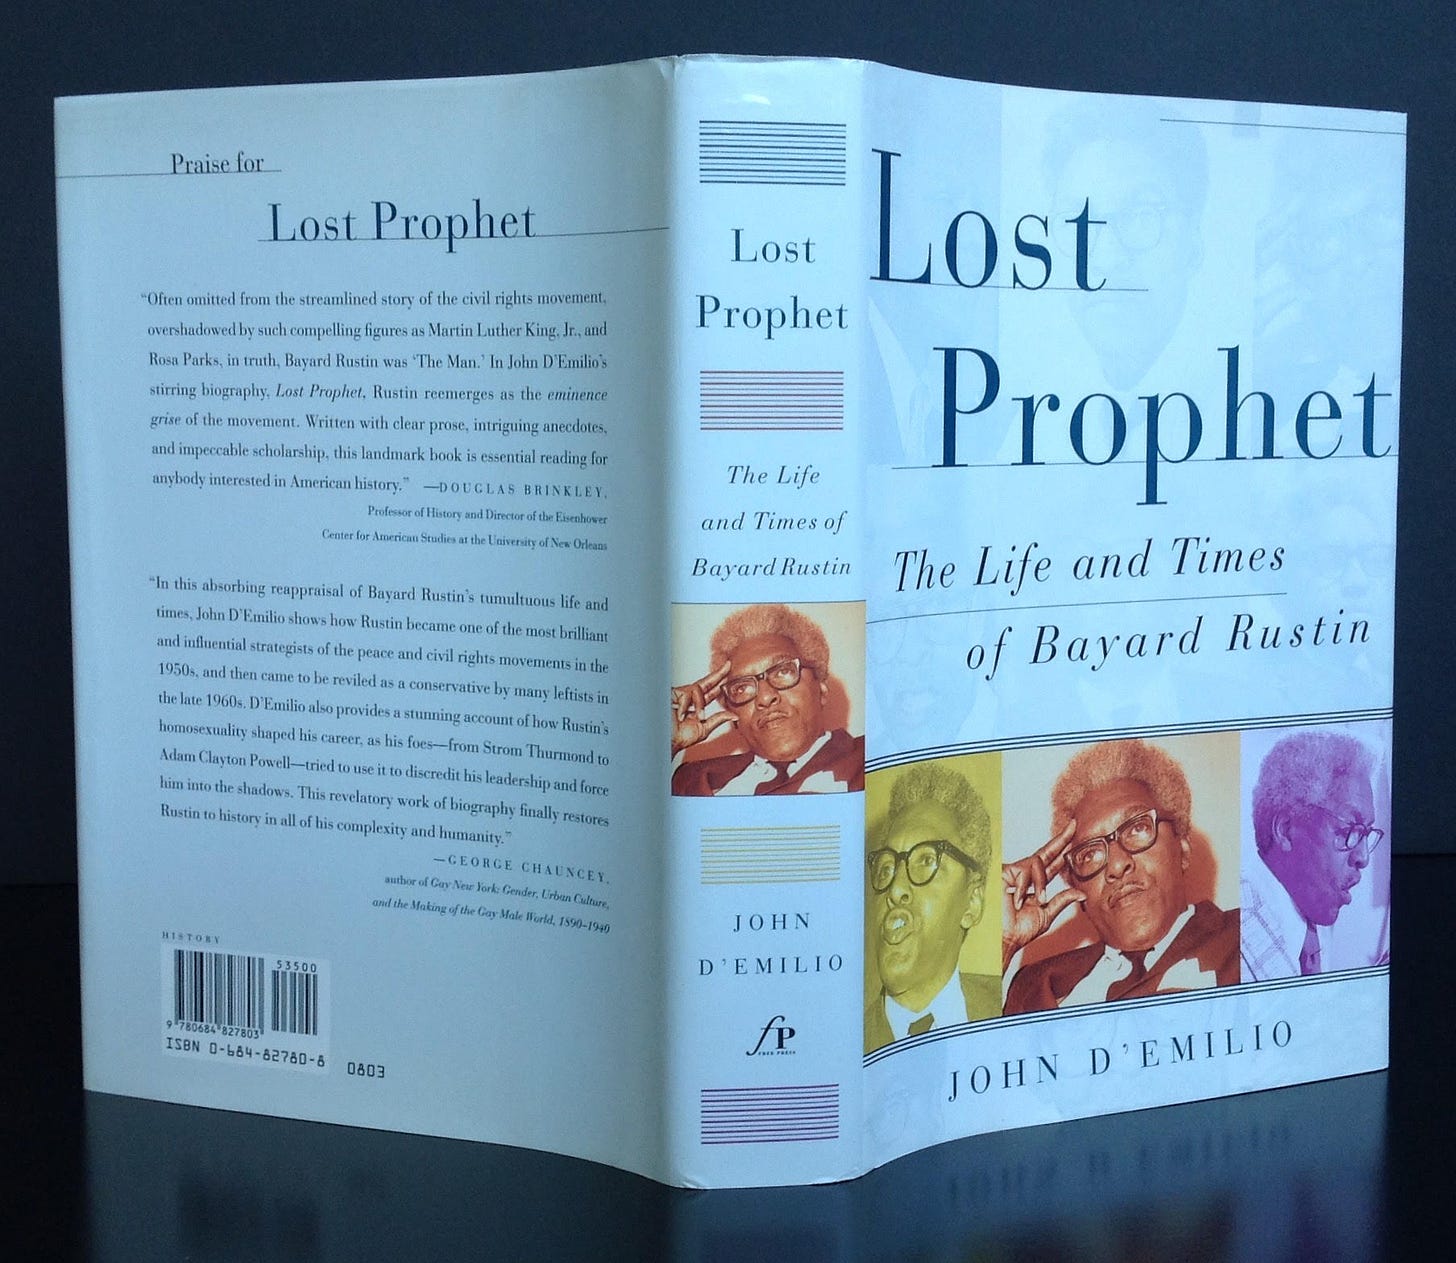 The photo shows a book split open, propped up, and with the book cover facing the camera. The left side shows the back cover of the book showing text "Praise for Lost Prophet" followed by small text in two paragraphs. The book spine's text reads, "Lost Prophet: The Life and Times of Bayard Rustin, Joh D'Emilio". The right side of the photo shows the front cover of the book with text that reads, "Lost Prophet: The Life and Times of Bayard Rustin, John D'Emilio" with yellow, tan, and purple photos of Bayard Rustin in a row, side-by-side.